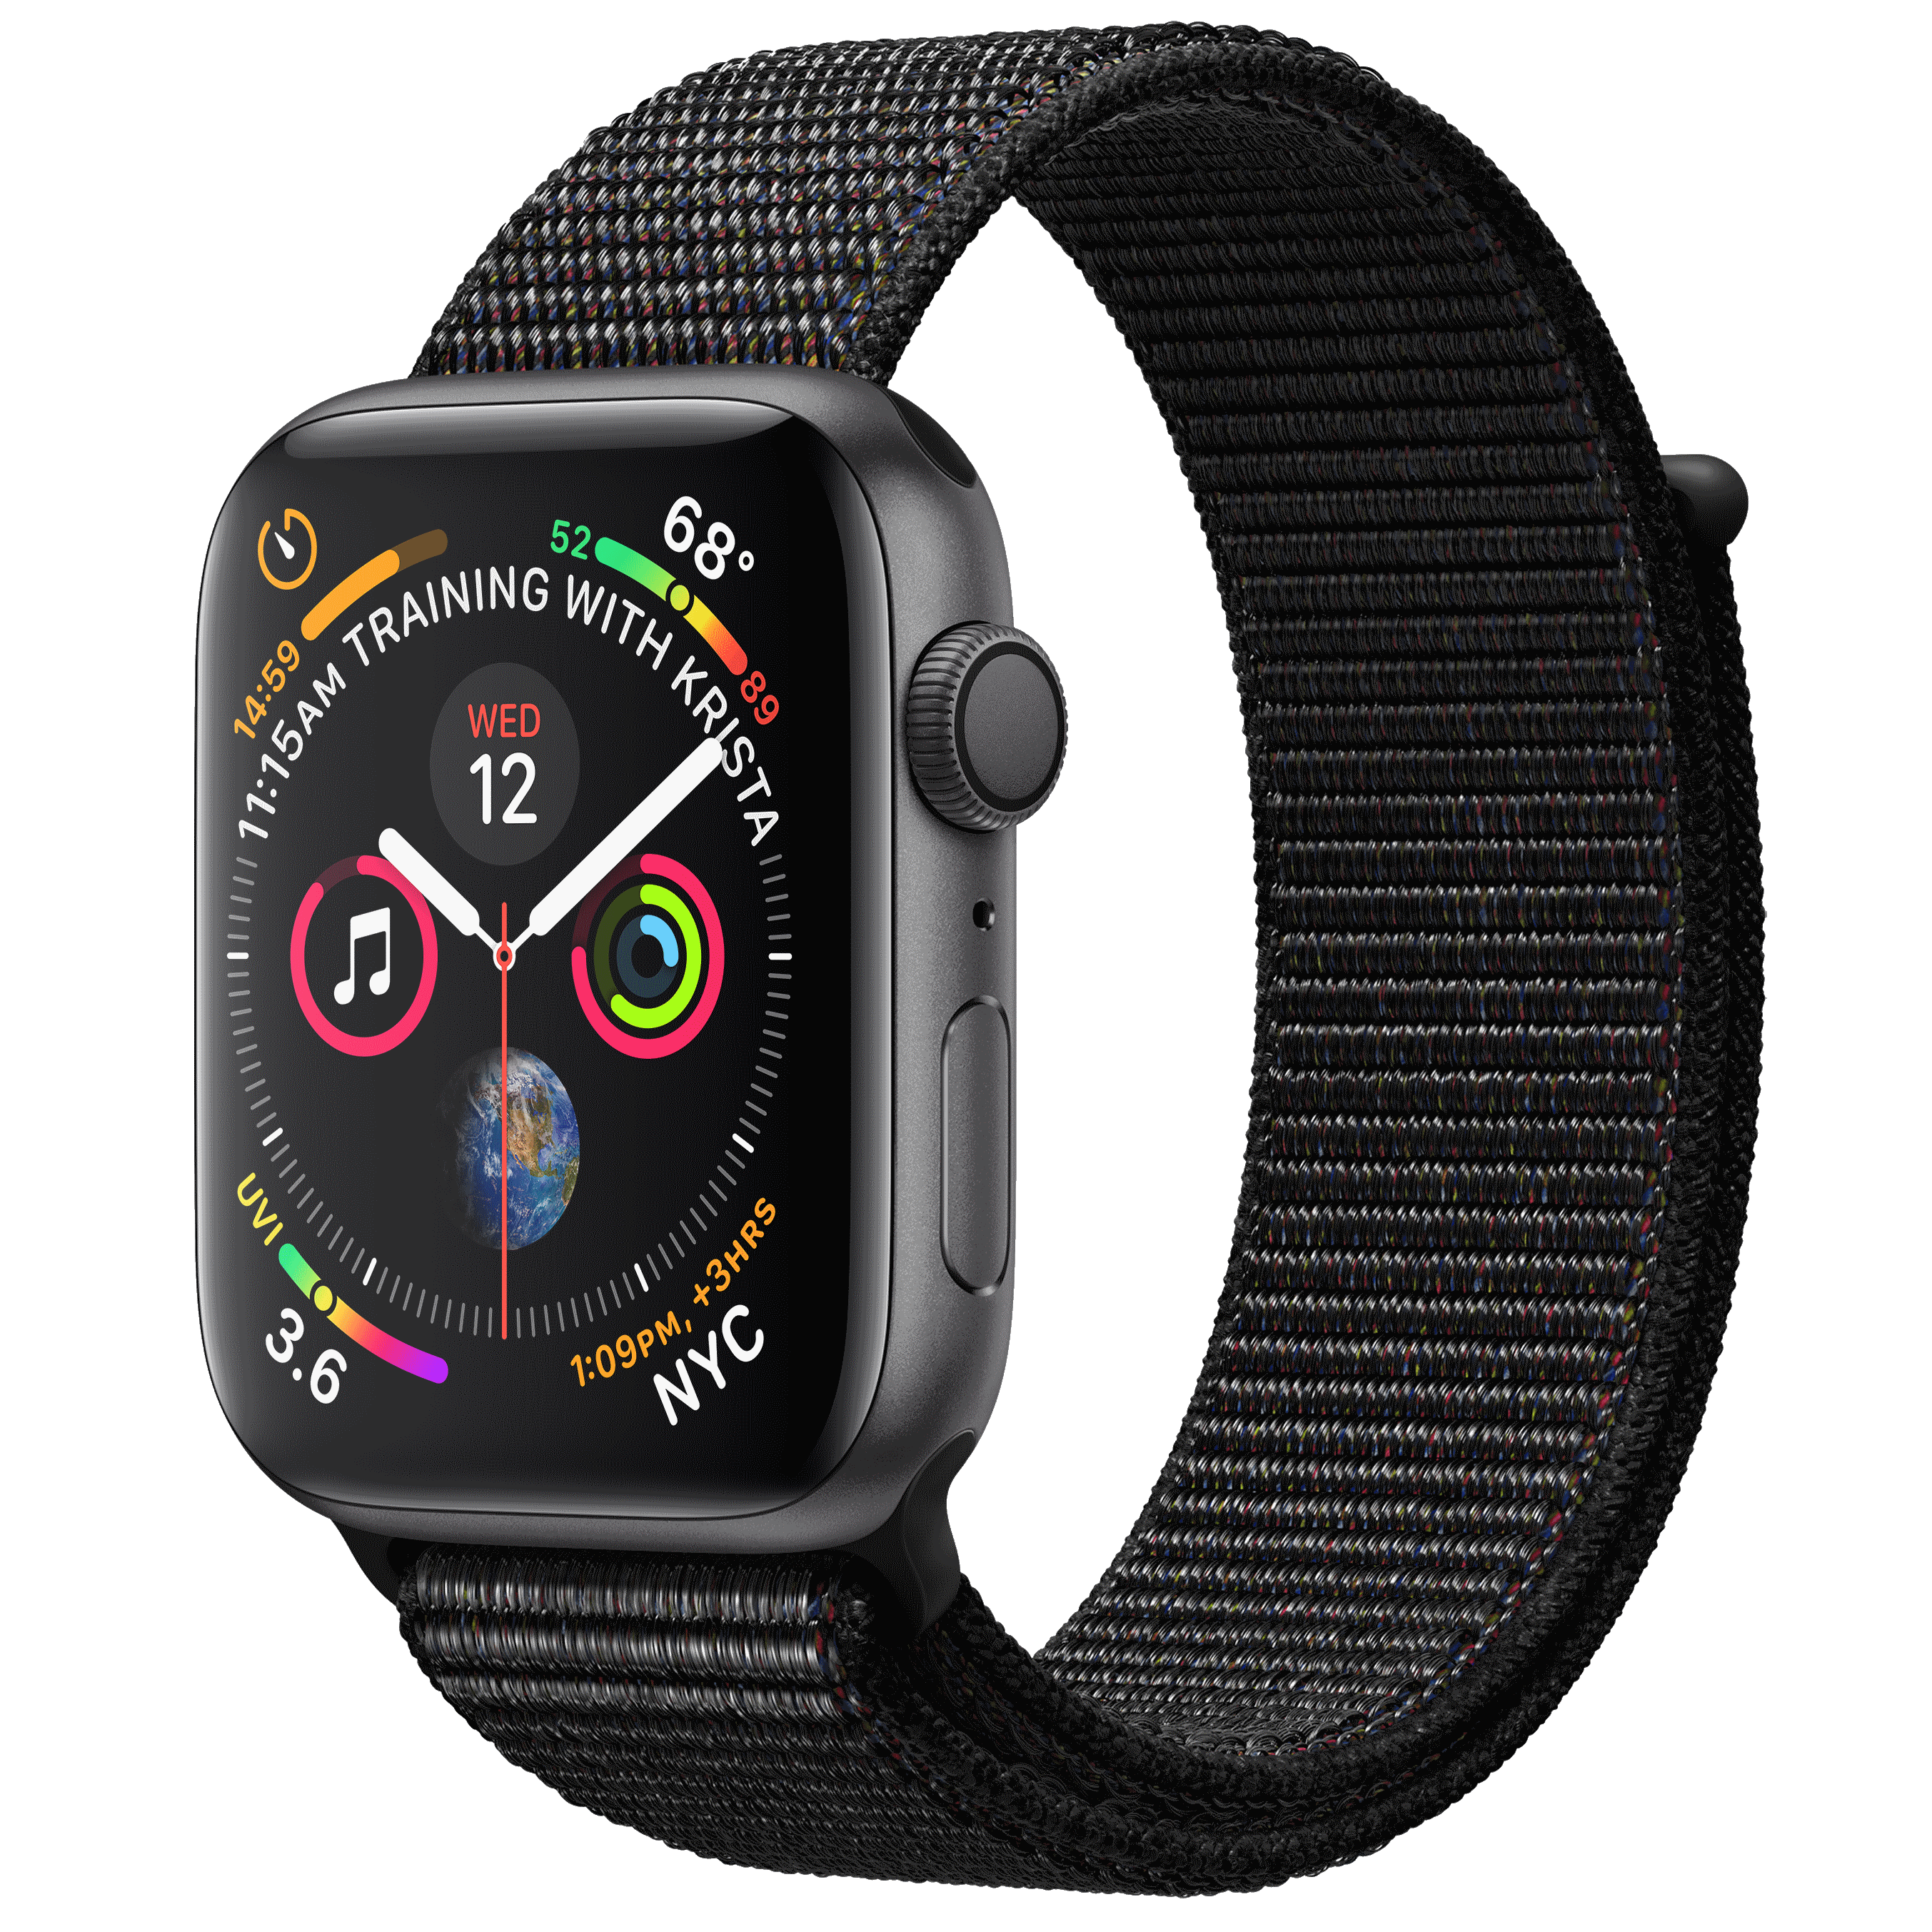 FileApple Watch Series 4.png The iPhone Wiki